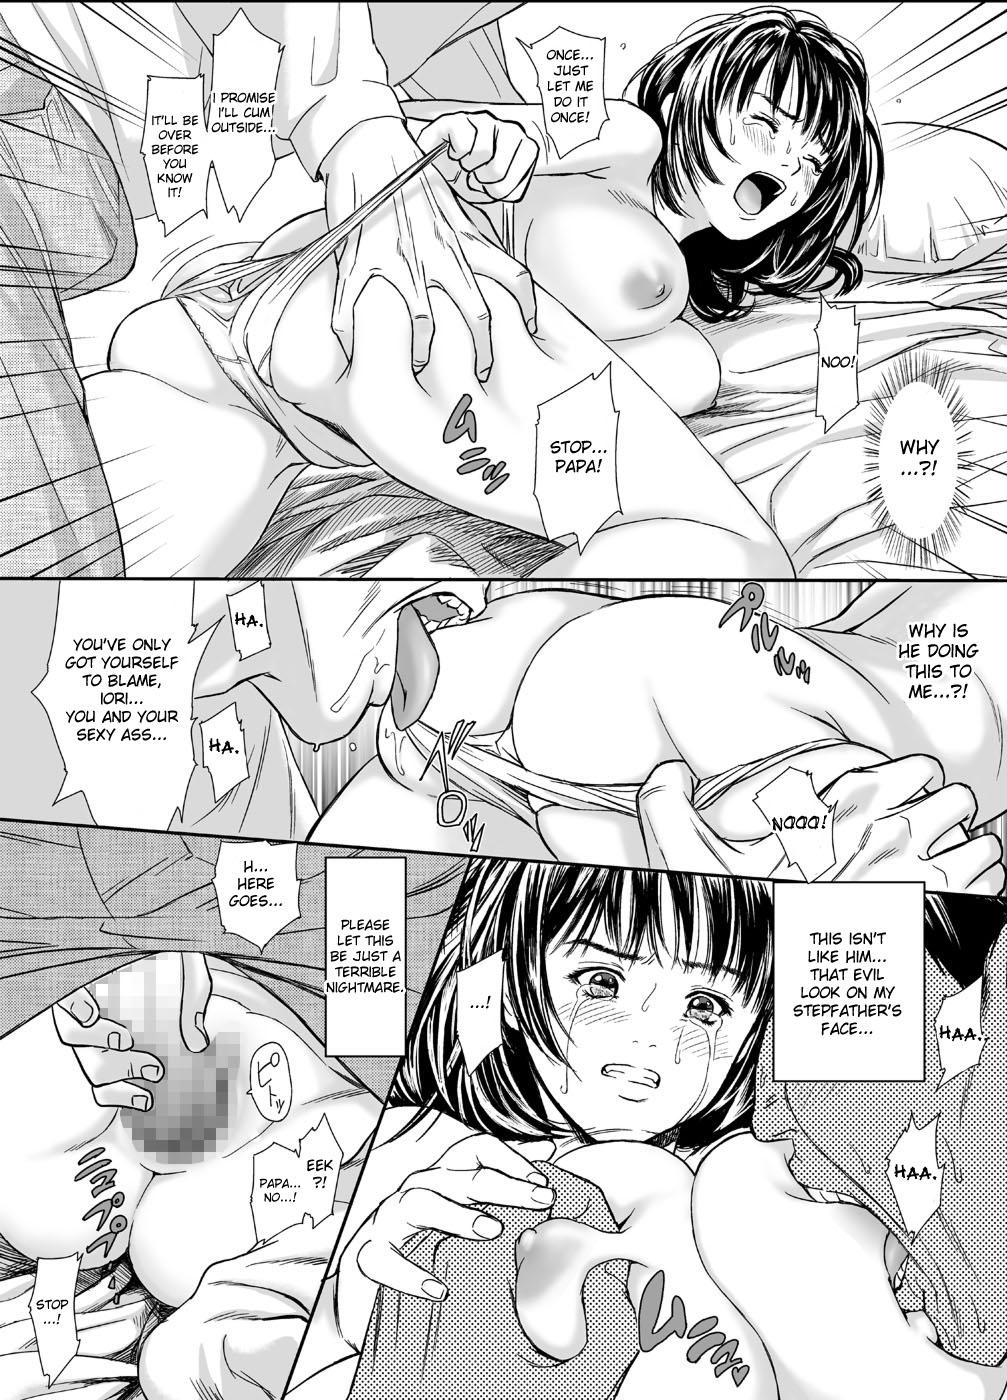 Bribe Iori - The Dark Side Of That Girl - Is Sofa - Page 5